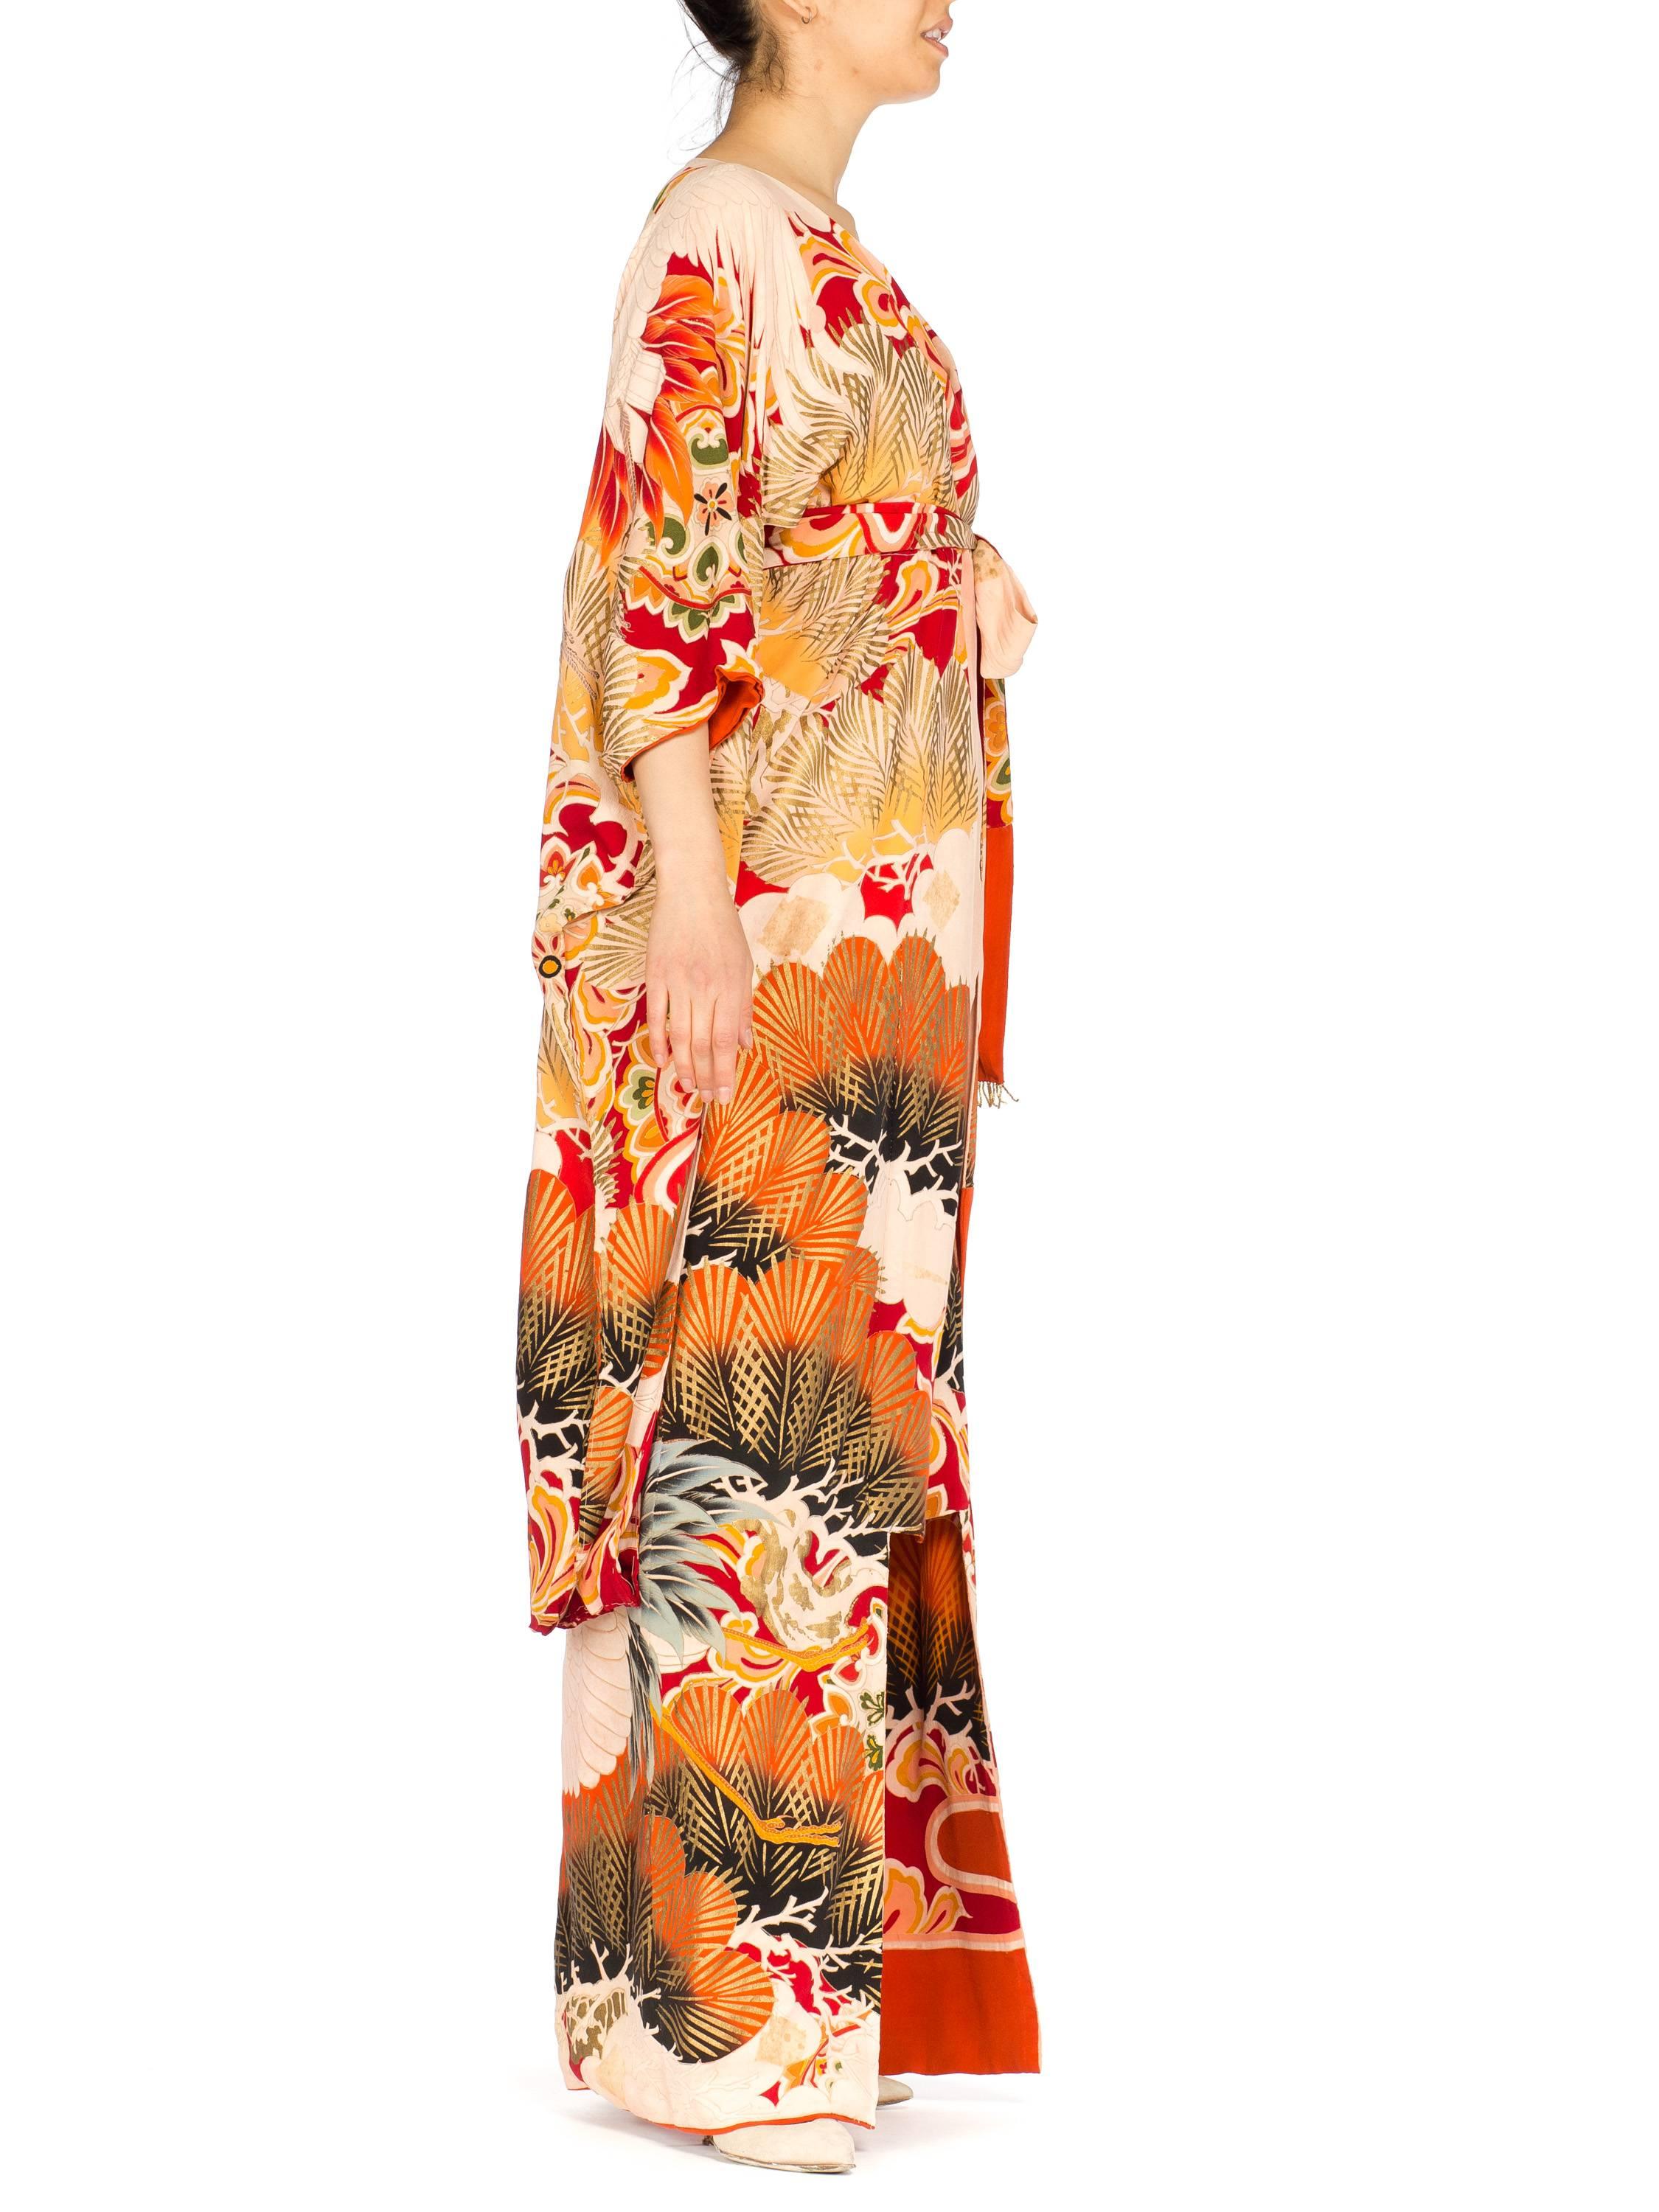 Orange MORPHEW COLLECTION Hand Painted Silk Wrap Kimono Dress Made From An Antique 192